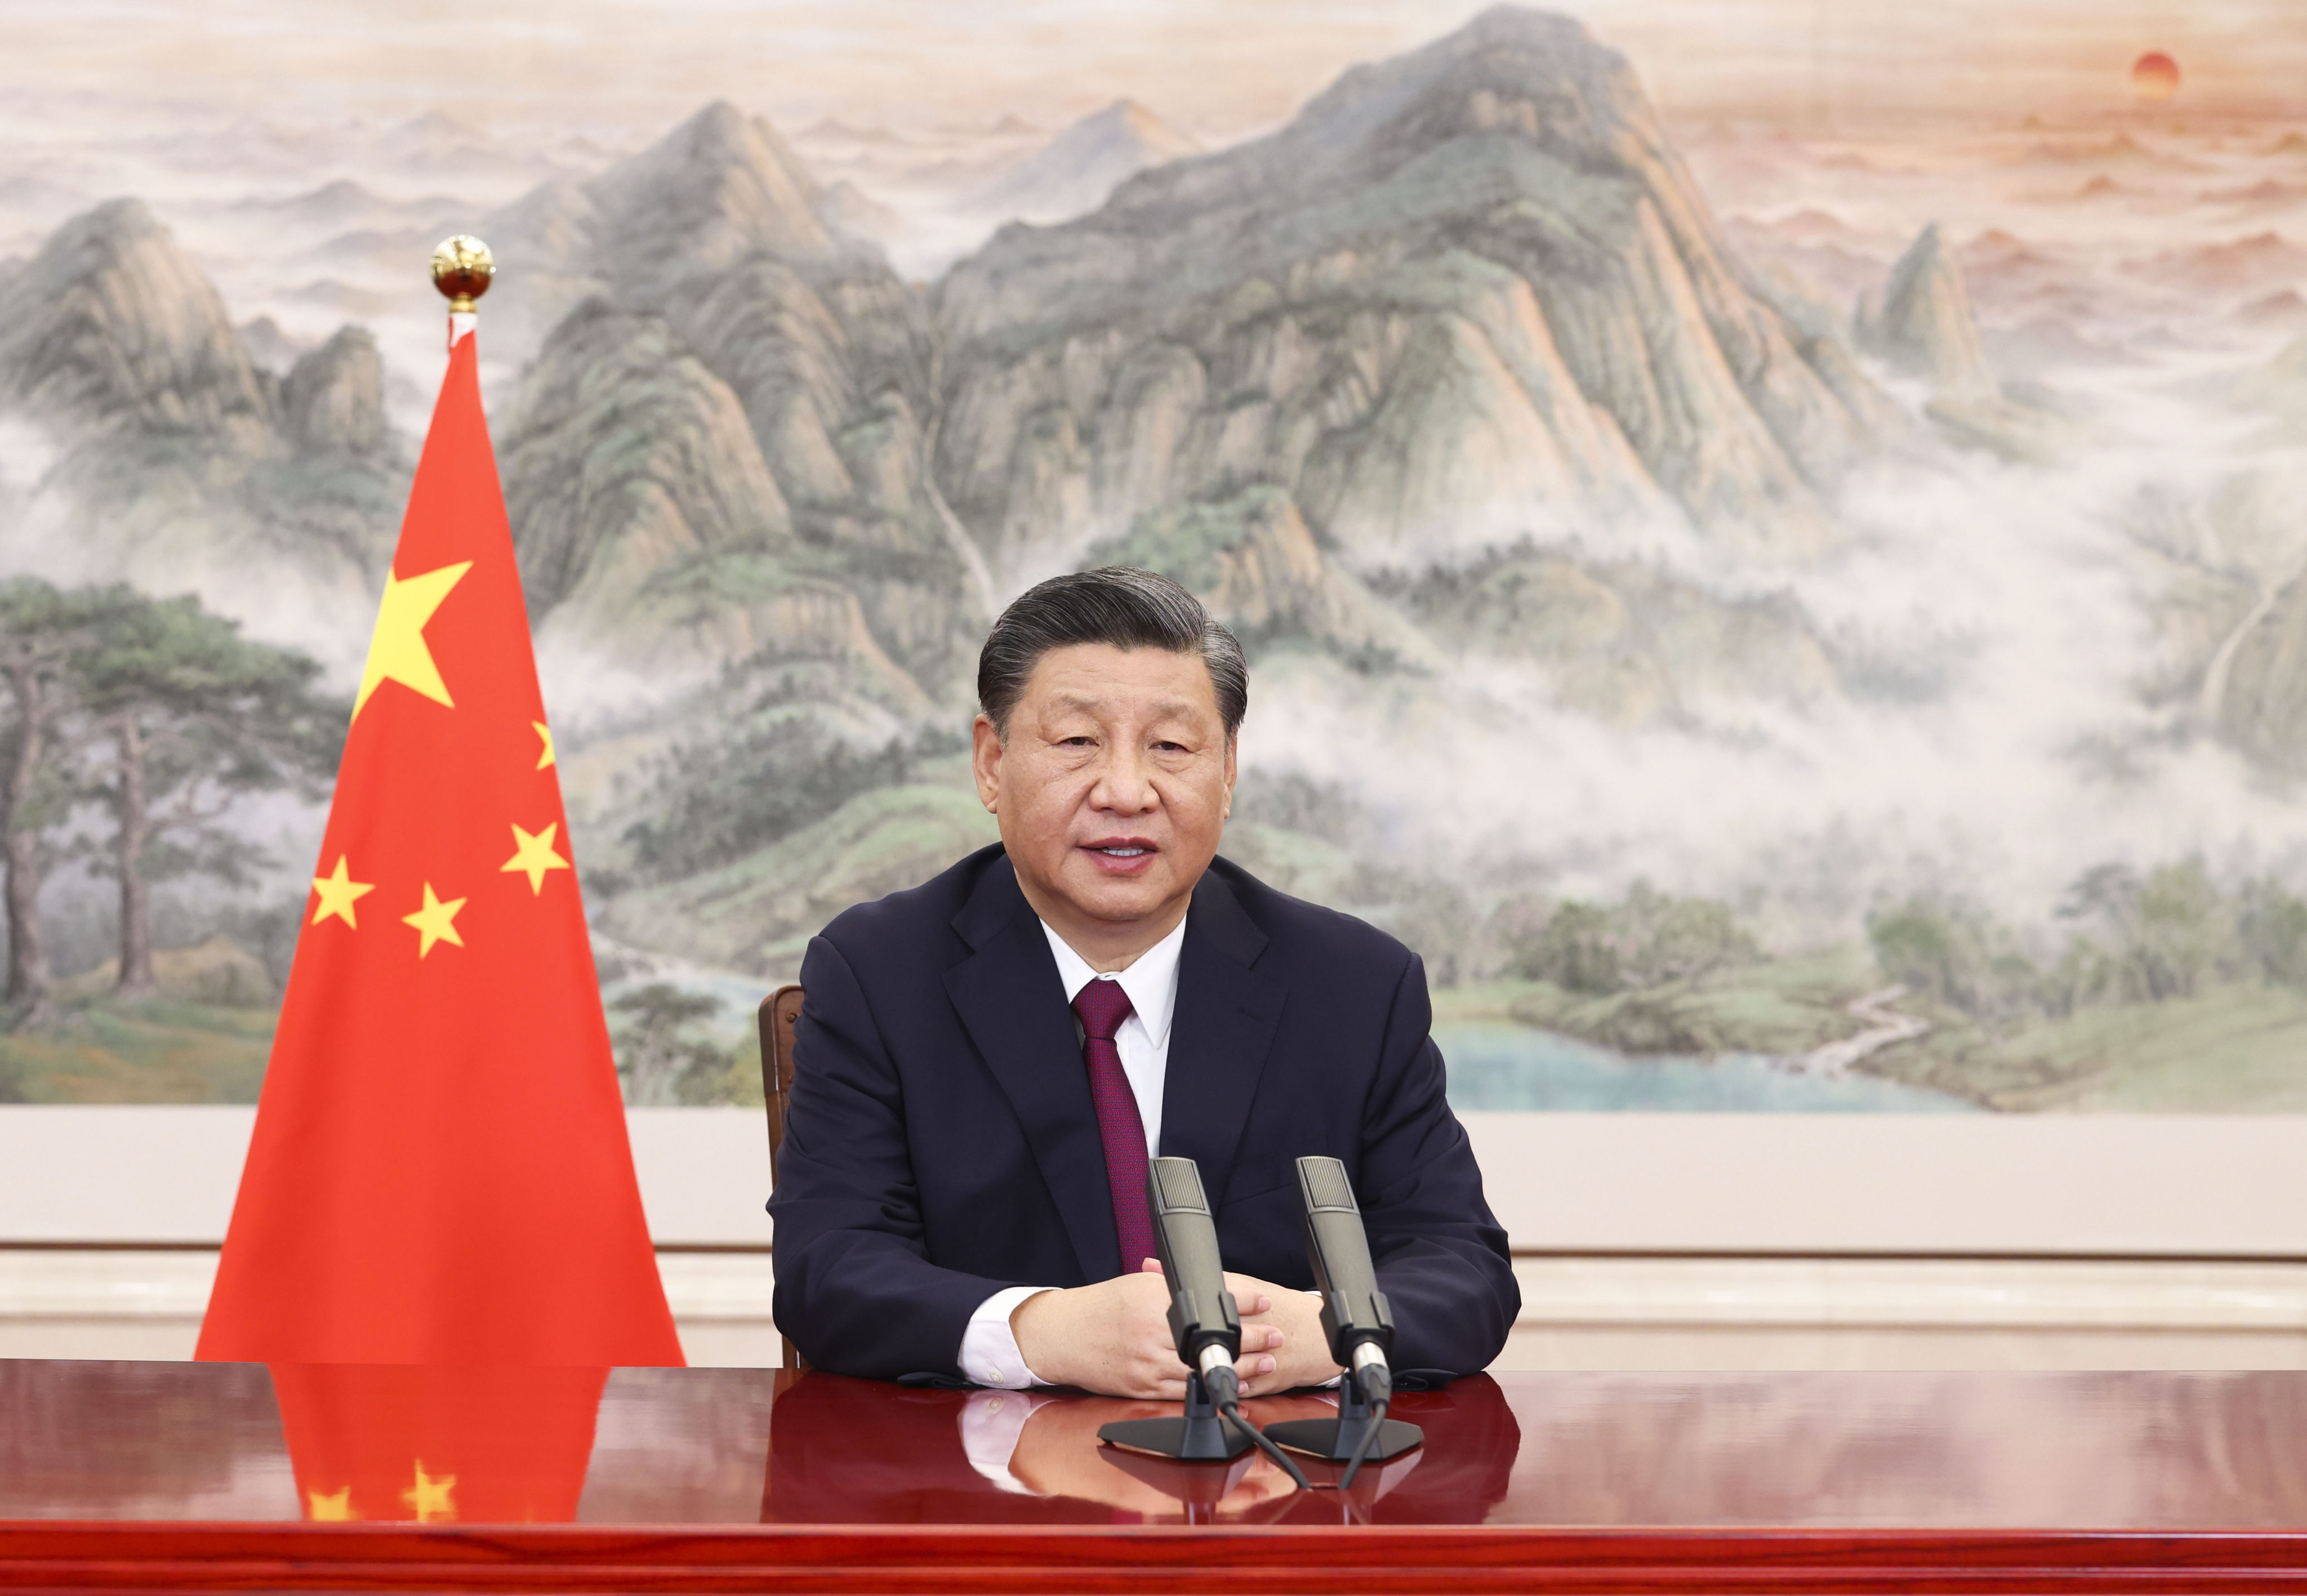 China’s President Xi Jinping said at the Boao Forum for Asia this week that power politics will only breach global peace. Photo: Xinhua